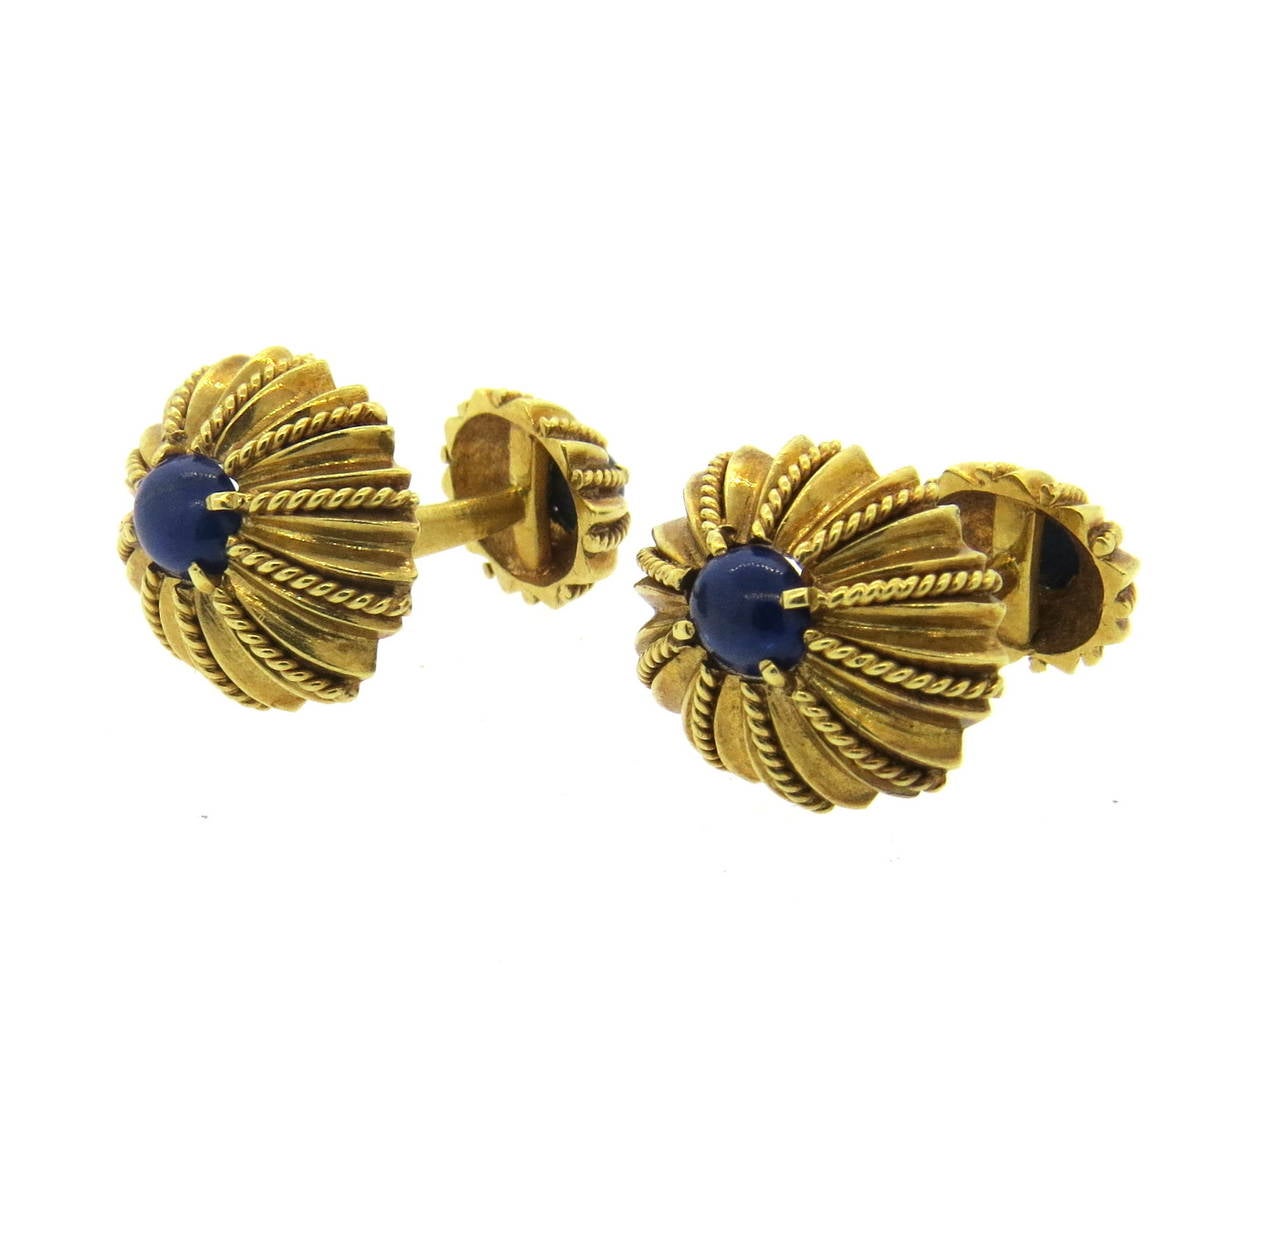 Vintage circa 1960s 18k gold cufflinks with lapis lazuli stones. Tops measure 19mm x 15mm, backs - 12mm x 10mm. Marked 5439 N.M. weight - 15.4gr